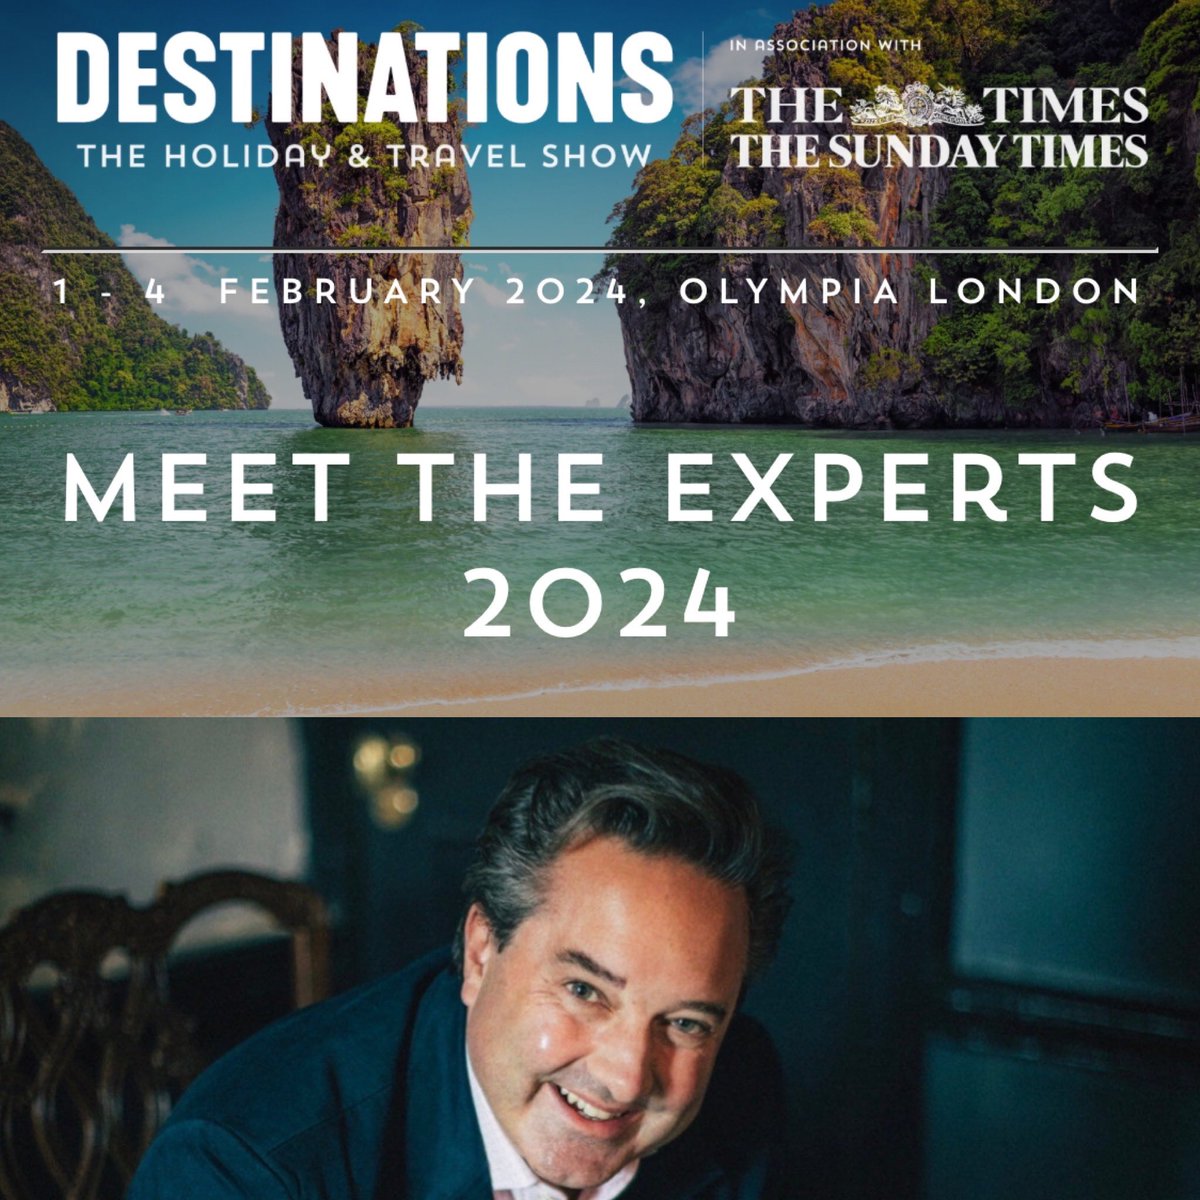 I’ll be at the Destinations Travel Show @DestinationShow in Olympia next week pouring delicious wine and taking guests on our very own insider’s tour to some of the world’s most picturesque wine destinations. Come and join us in the Experts Theatre at 15:45 on Thursday 1st…